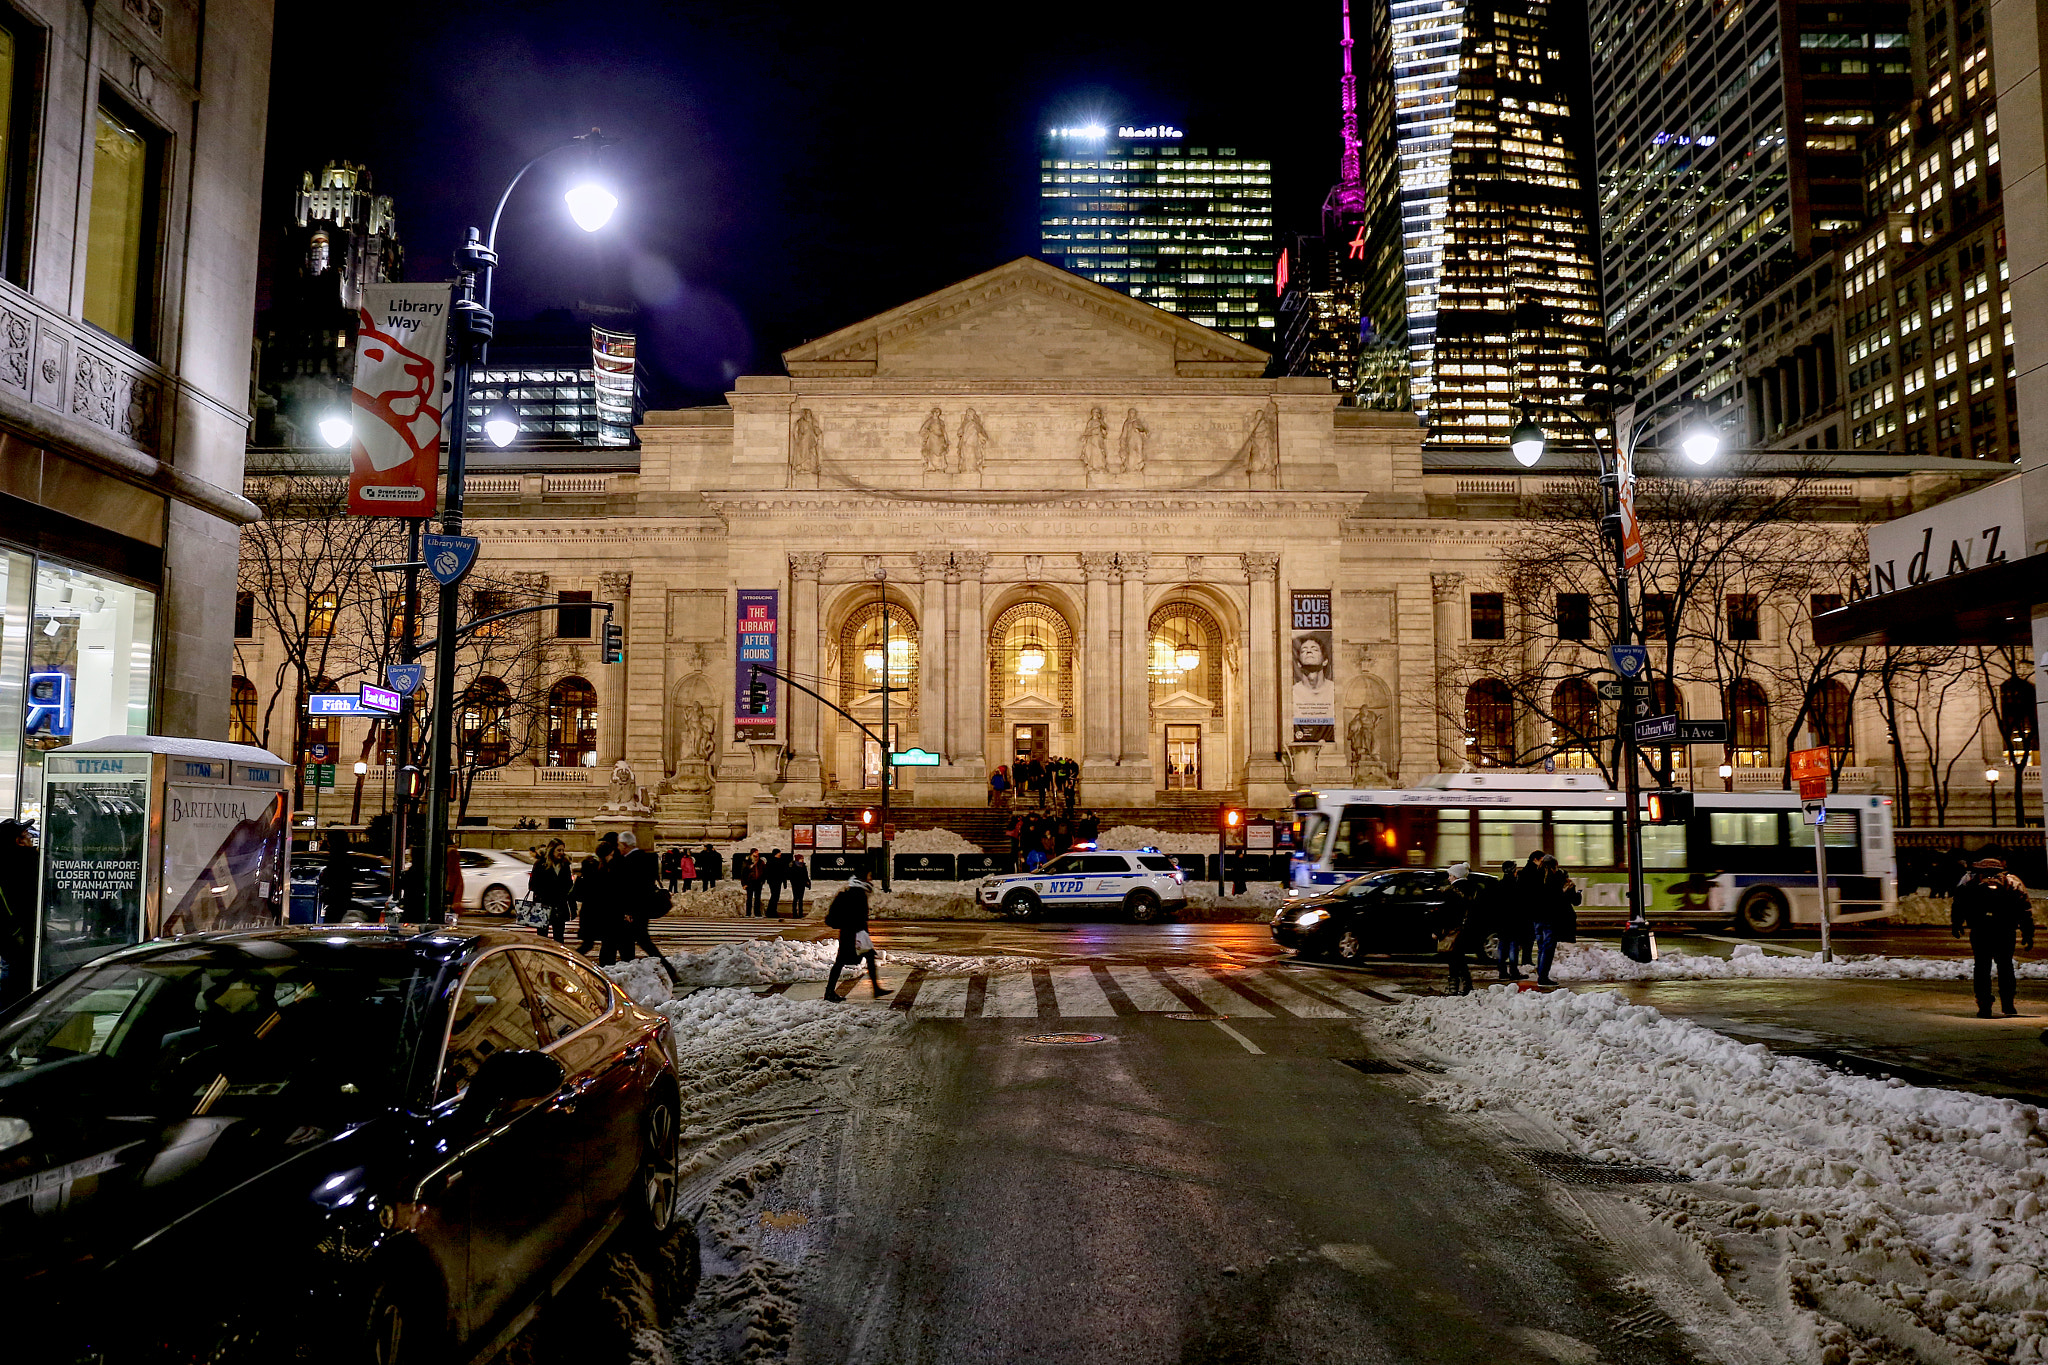 24.0 - 70.0 mm sample photo. New york public library at night photography